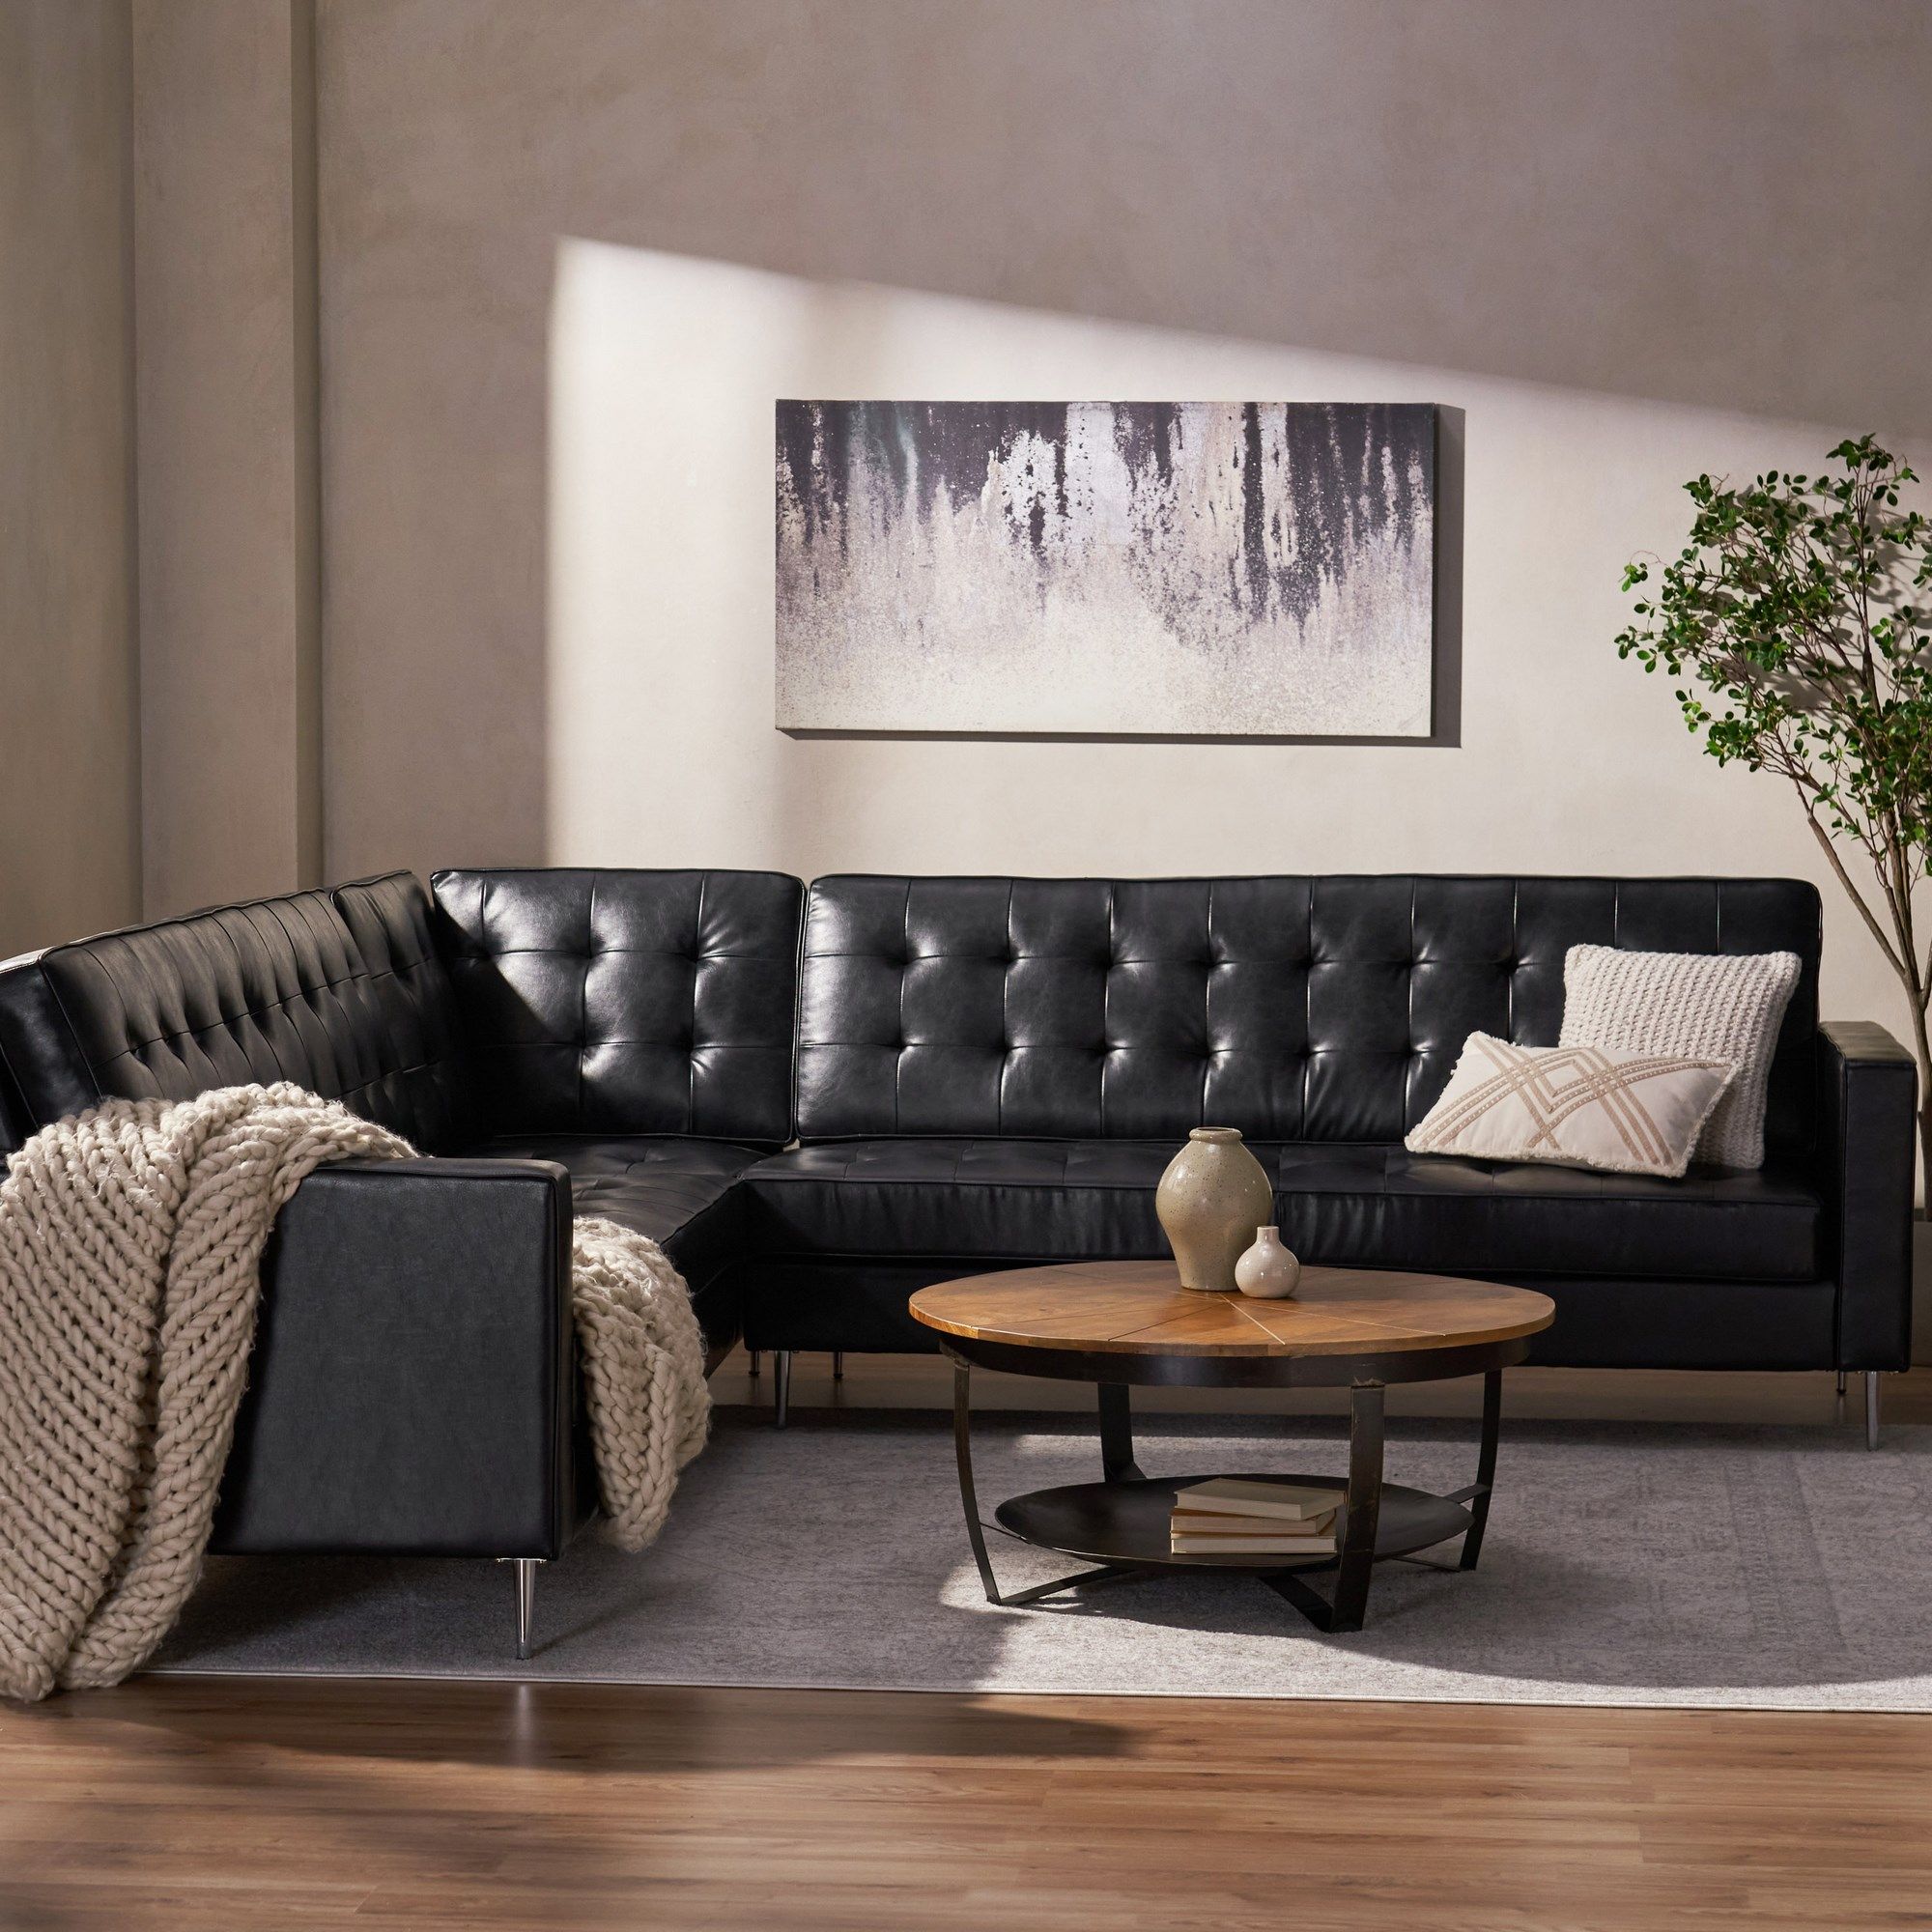 Gebo Contemporary Faux Leather Tufted 5 Seater Sectional Sofa Set, Midnight  Black And Chrome Intended For Faux Leather Sectional Sofa Sets (Photo 11 of 15)